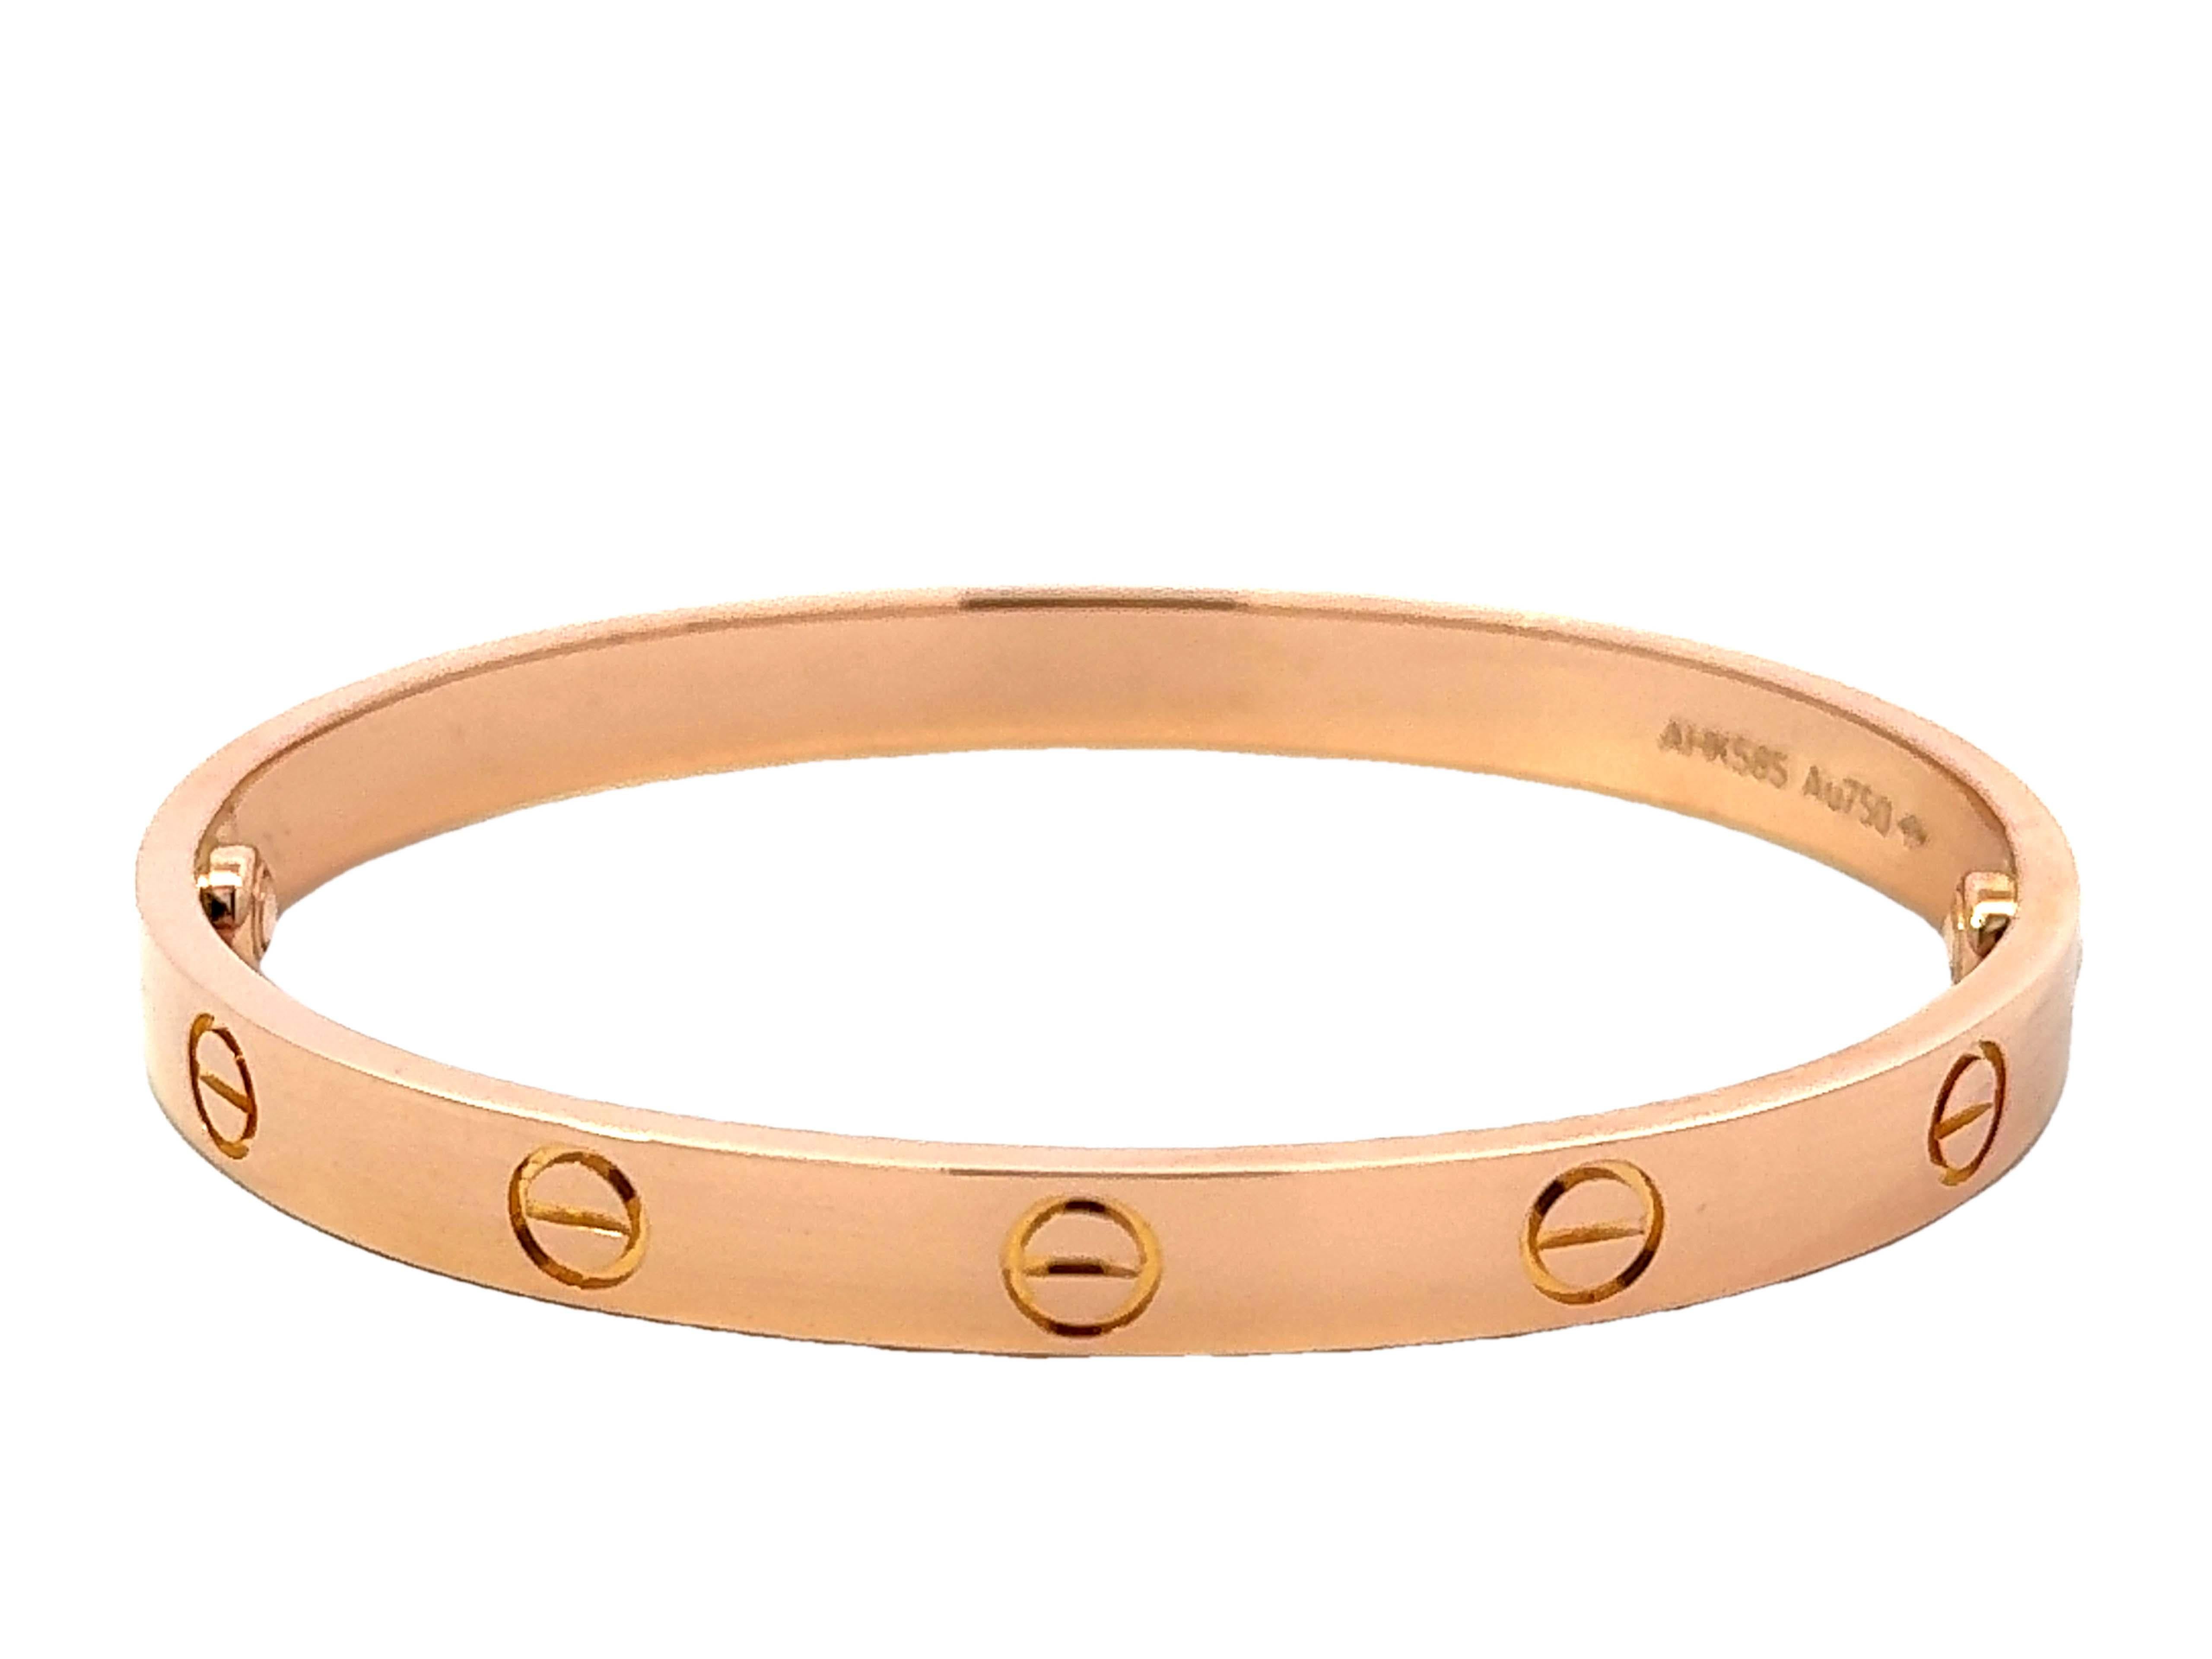 Cartier Love Bracelet in 18K Rose Gold Size 17 With Box and Papers For Sale 1